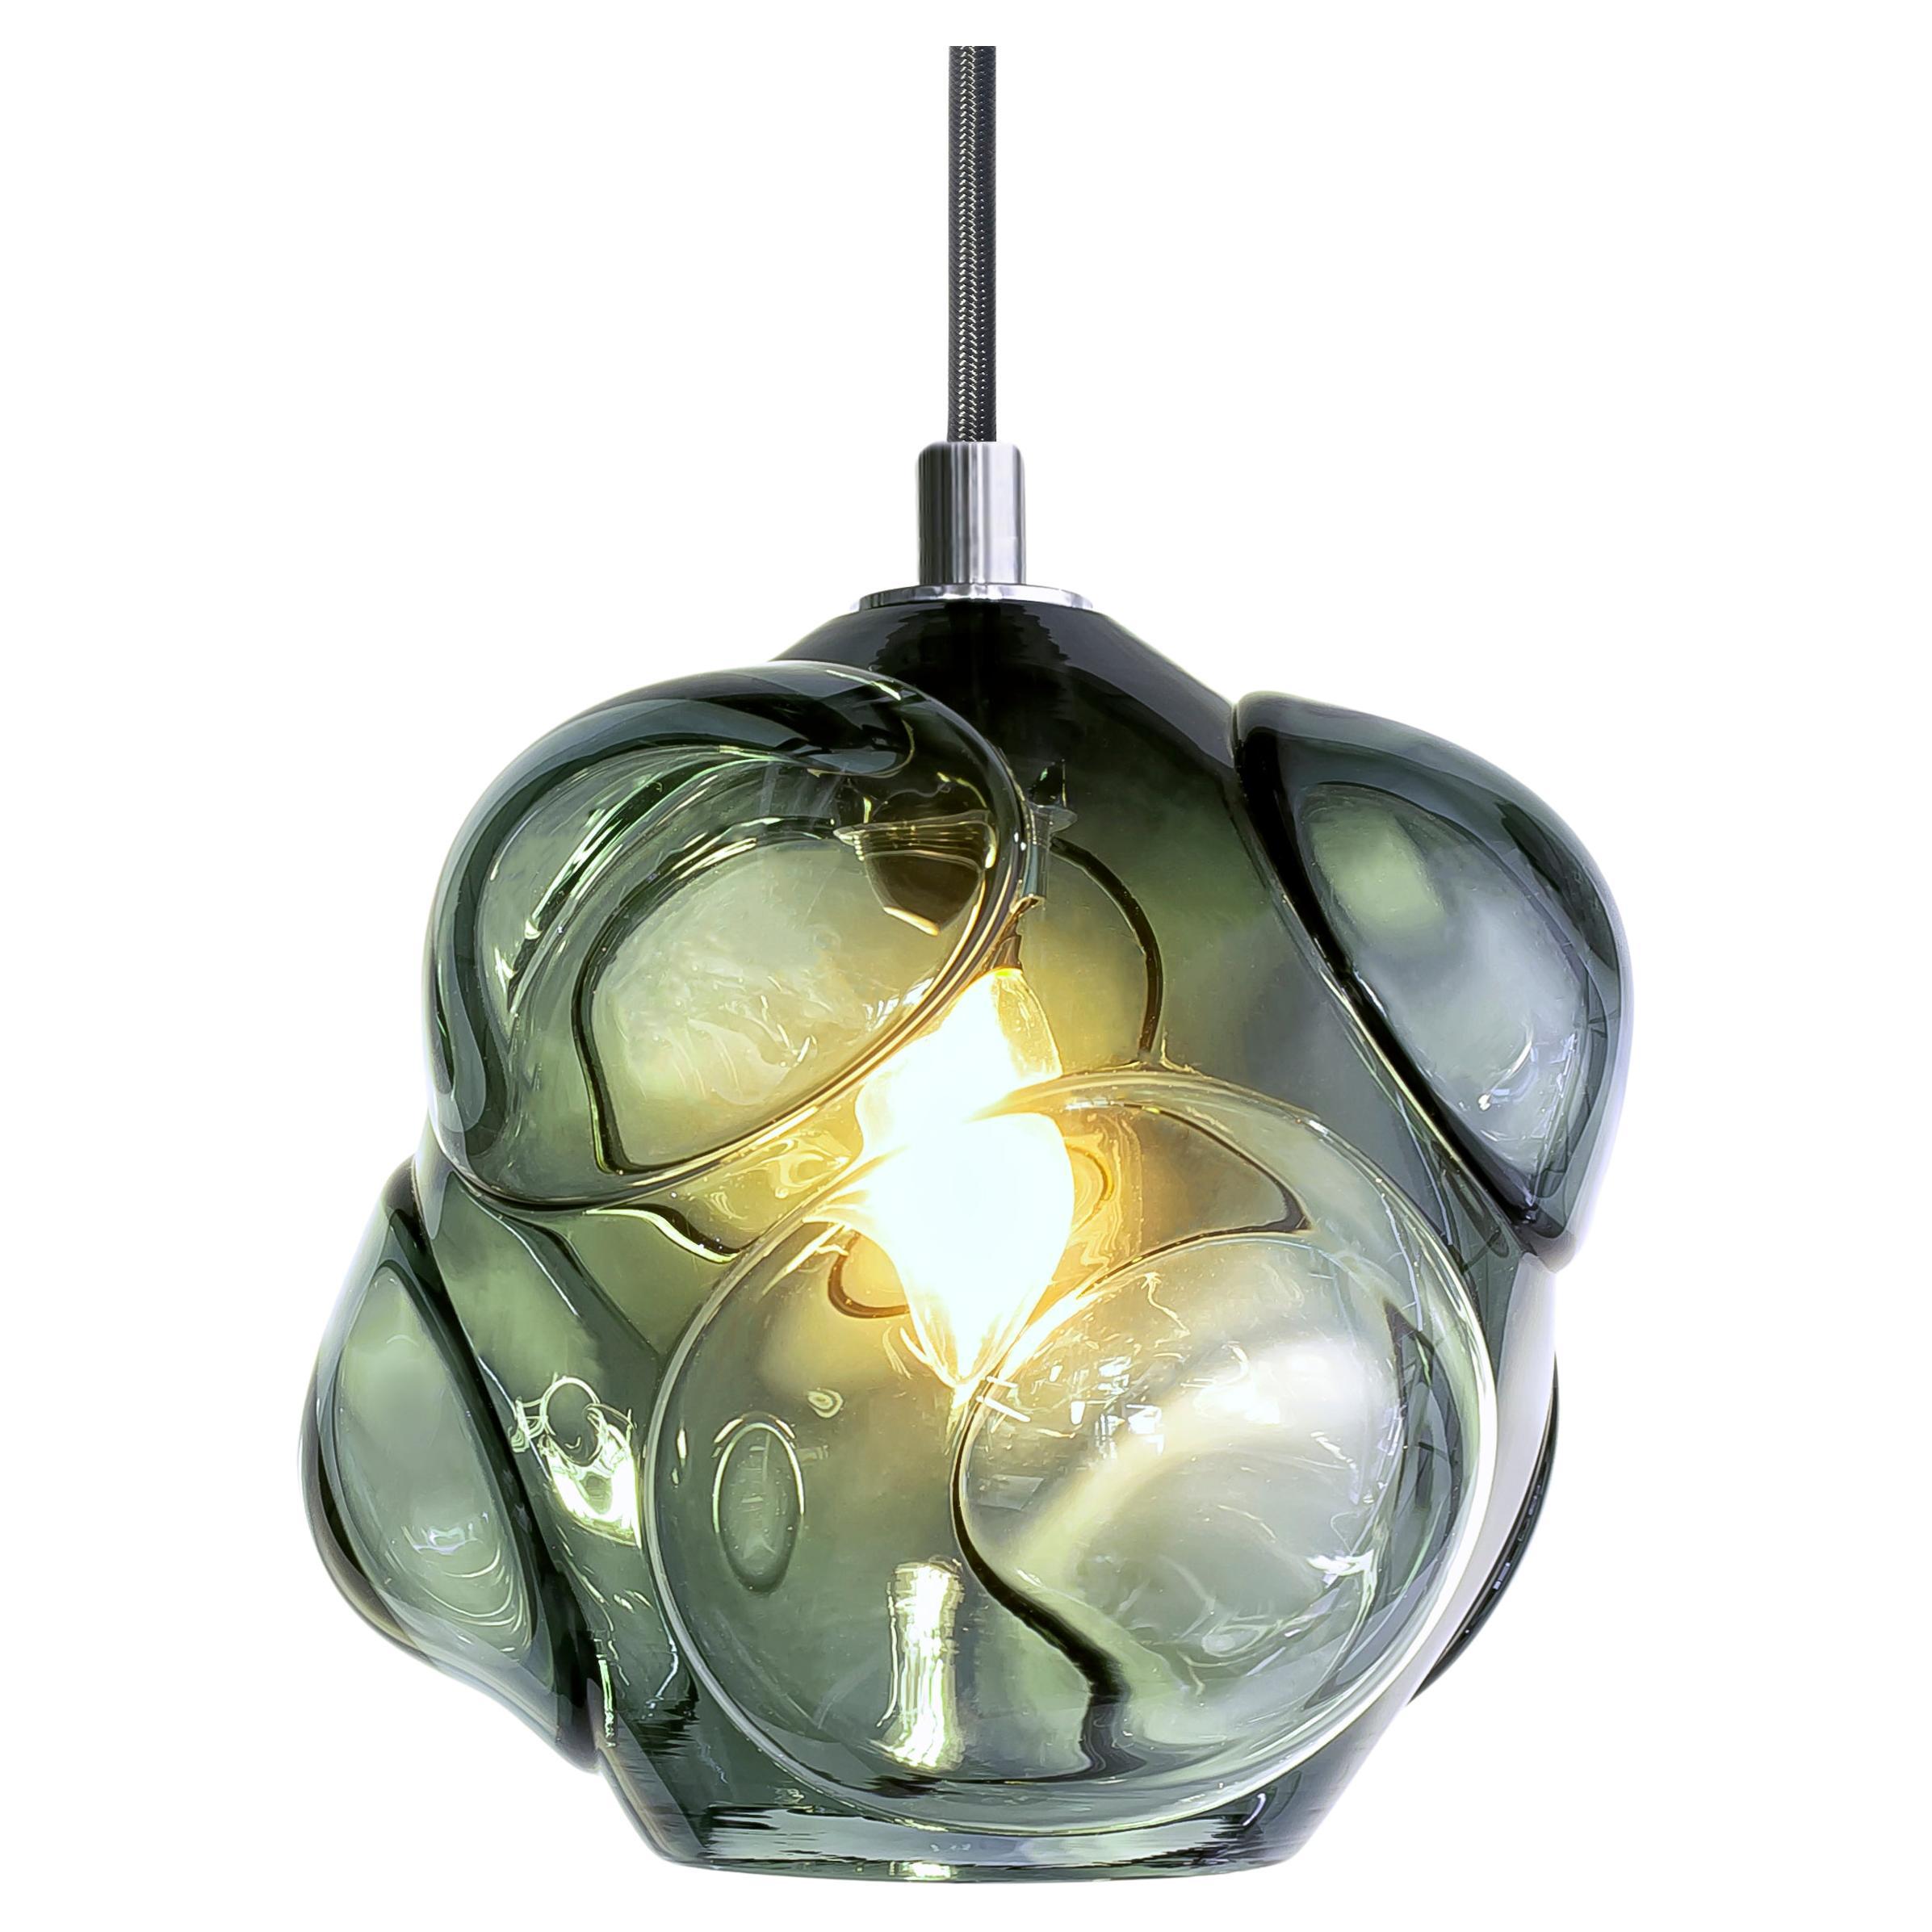 Cumulo Grey, Pendant Light, Hand Blown Glass - Made to Order